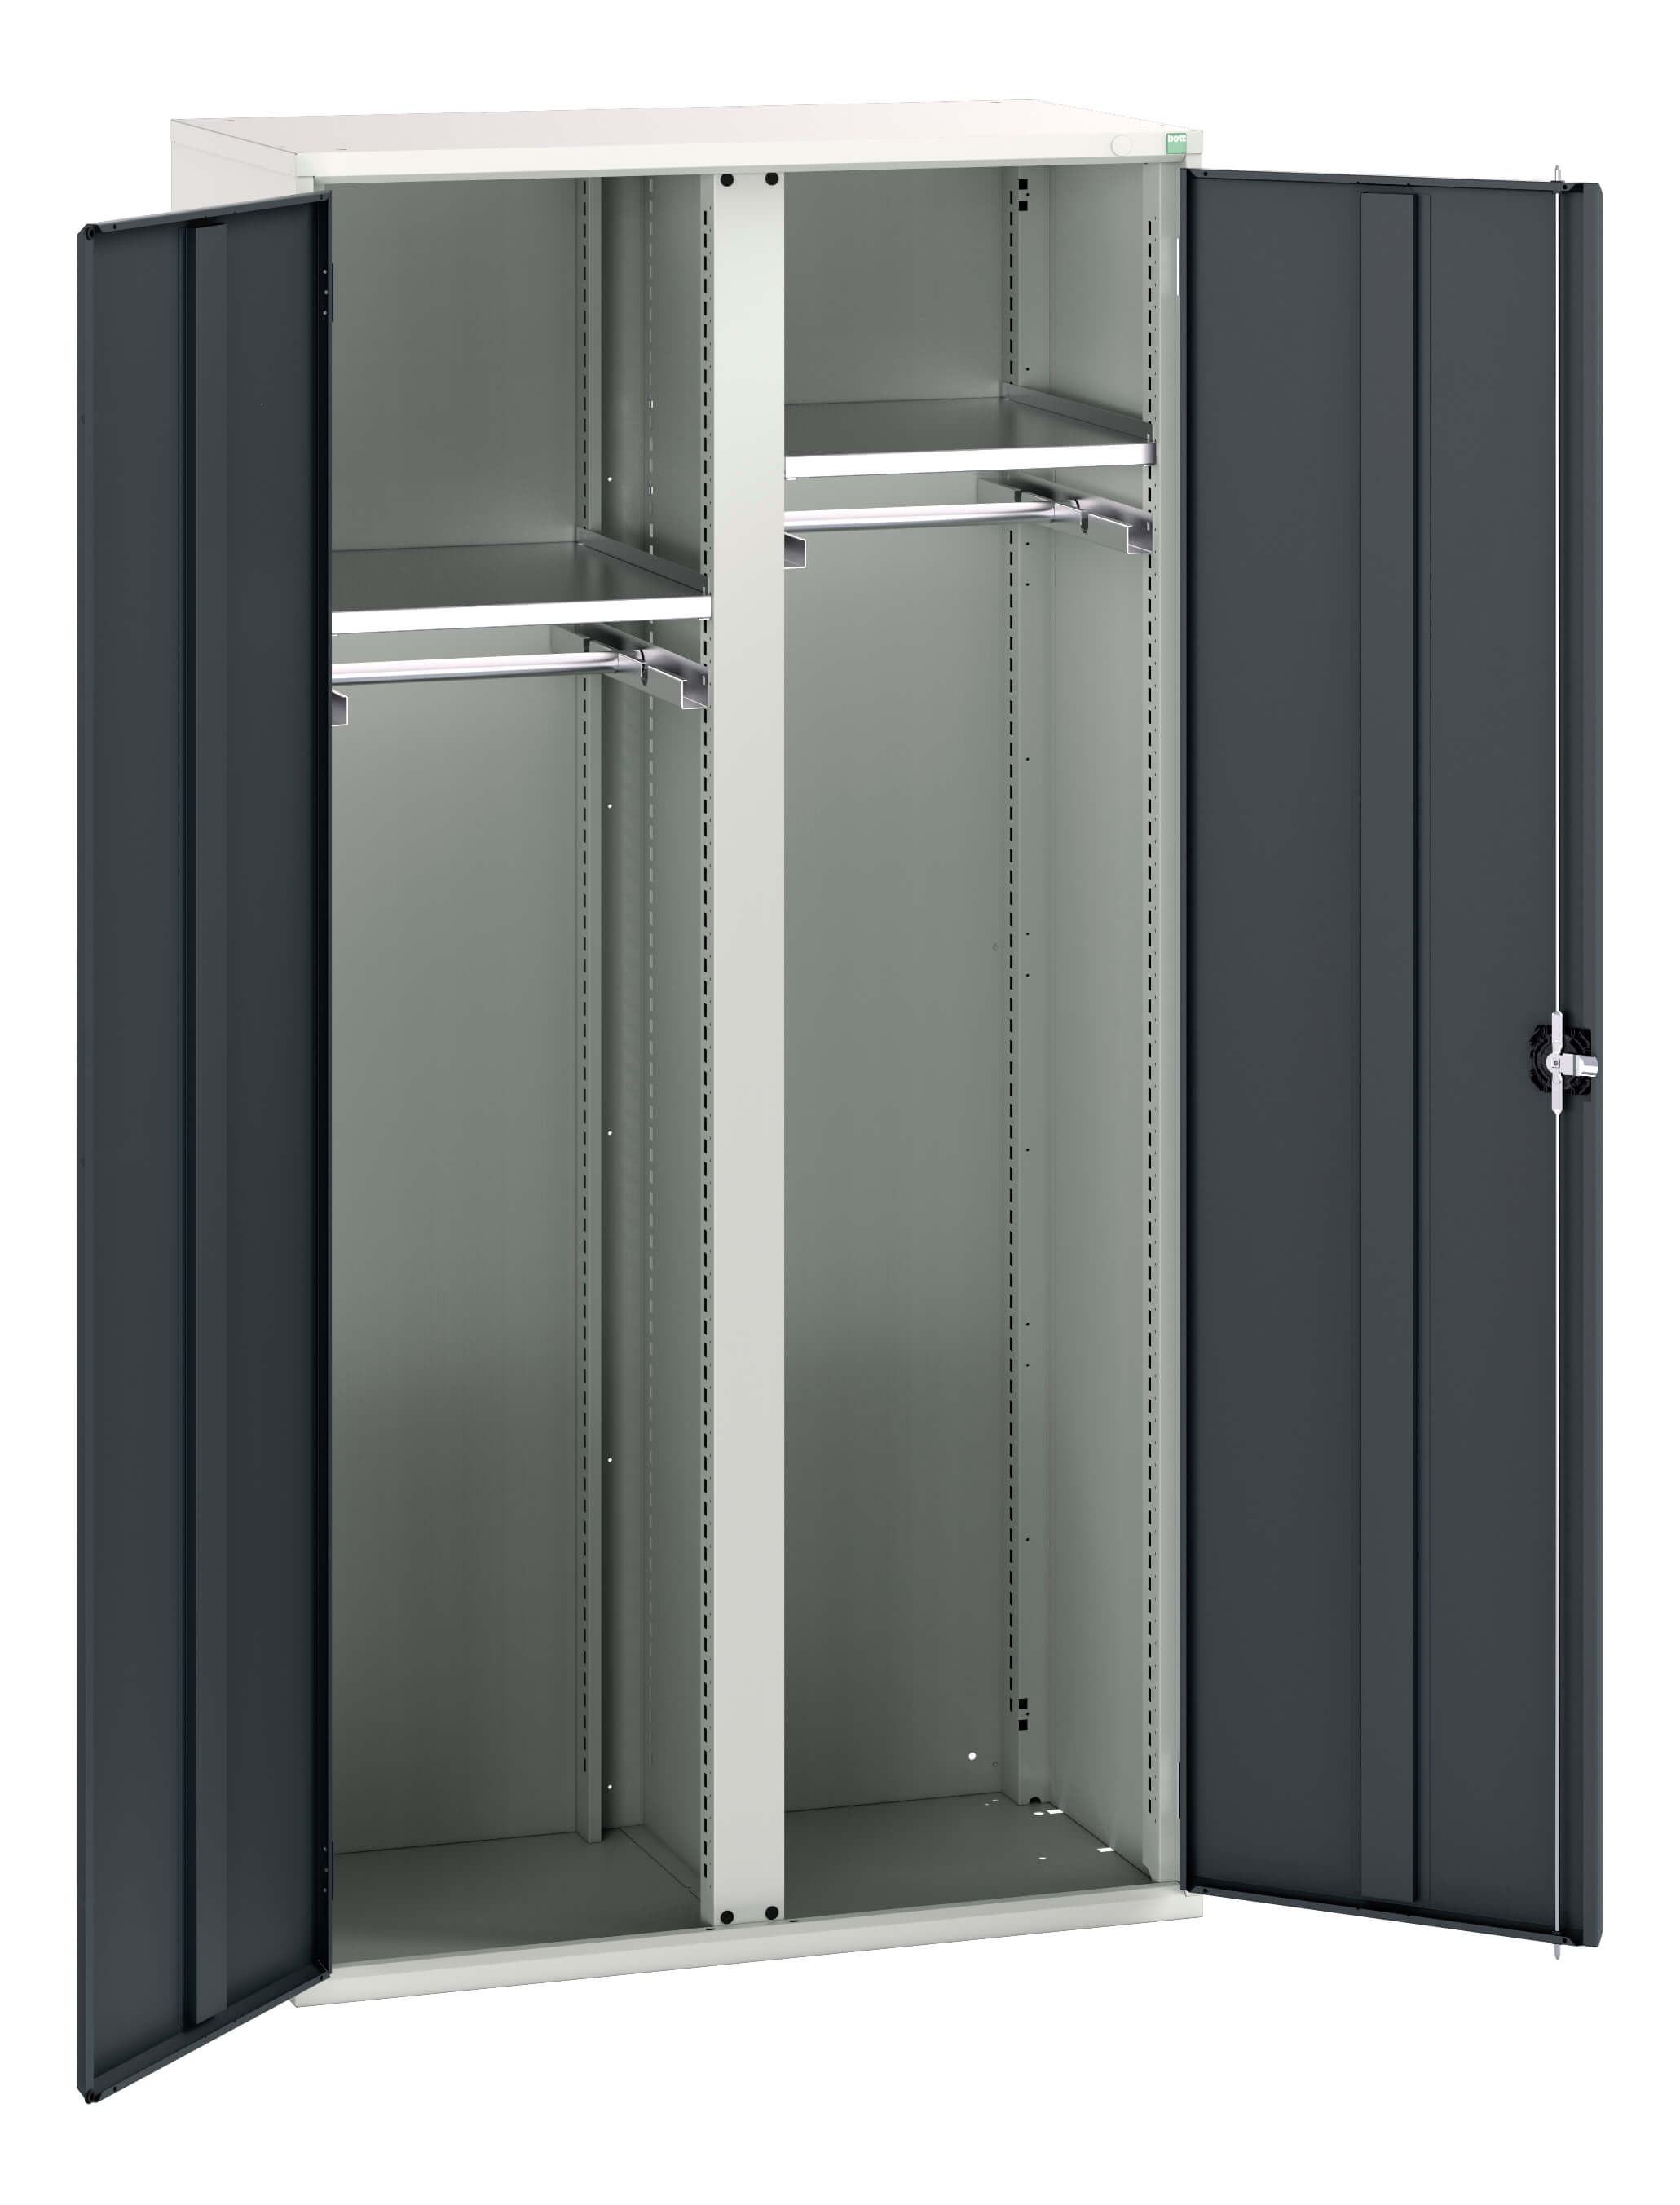 Bott Verso Ppe / Janitorial Kitted Cupboard With Vertical Partition - 16926578.19